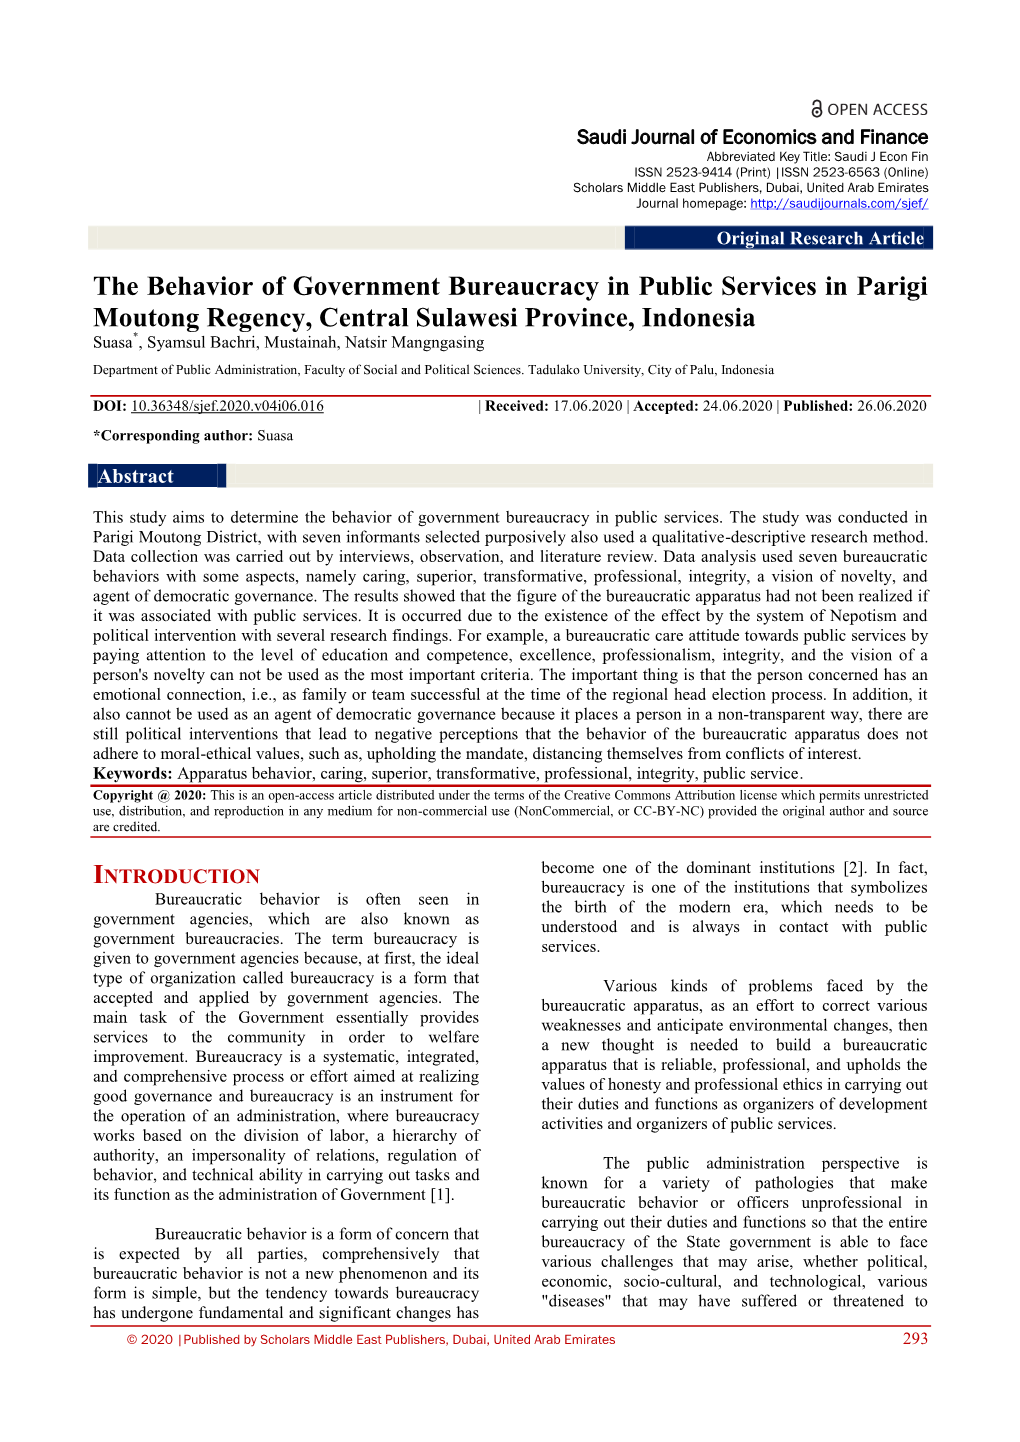 The Behavior of Government Bureaucracy in Public Services in Parigi Moutong Regency, Central Sulawesi Province, Indonesia